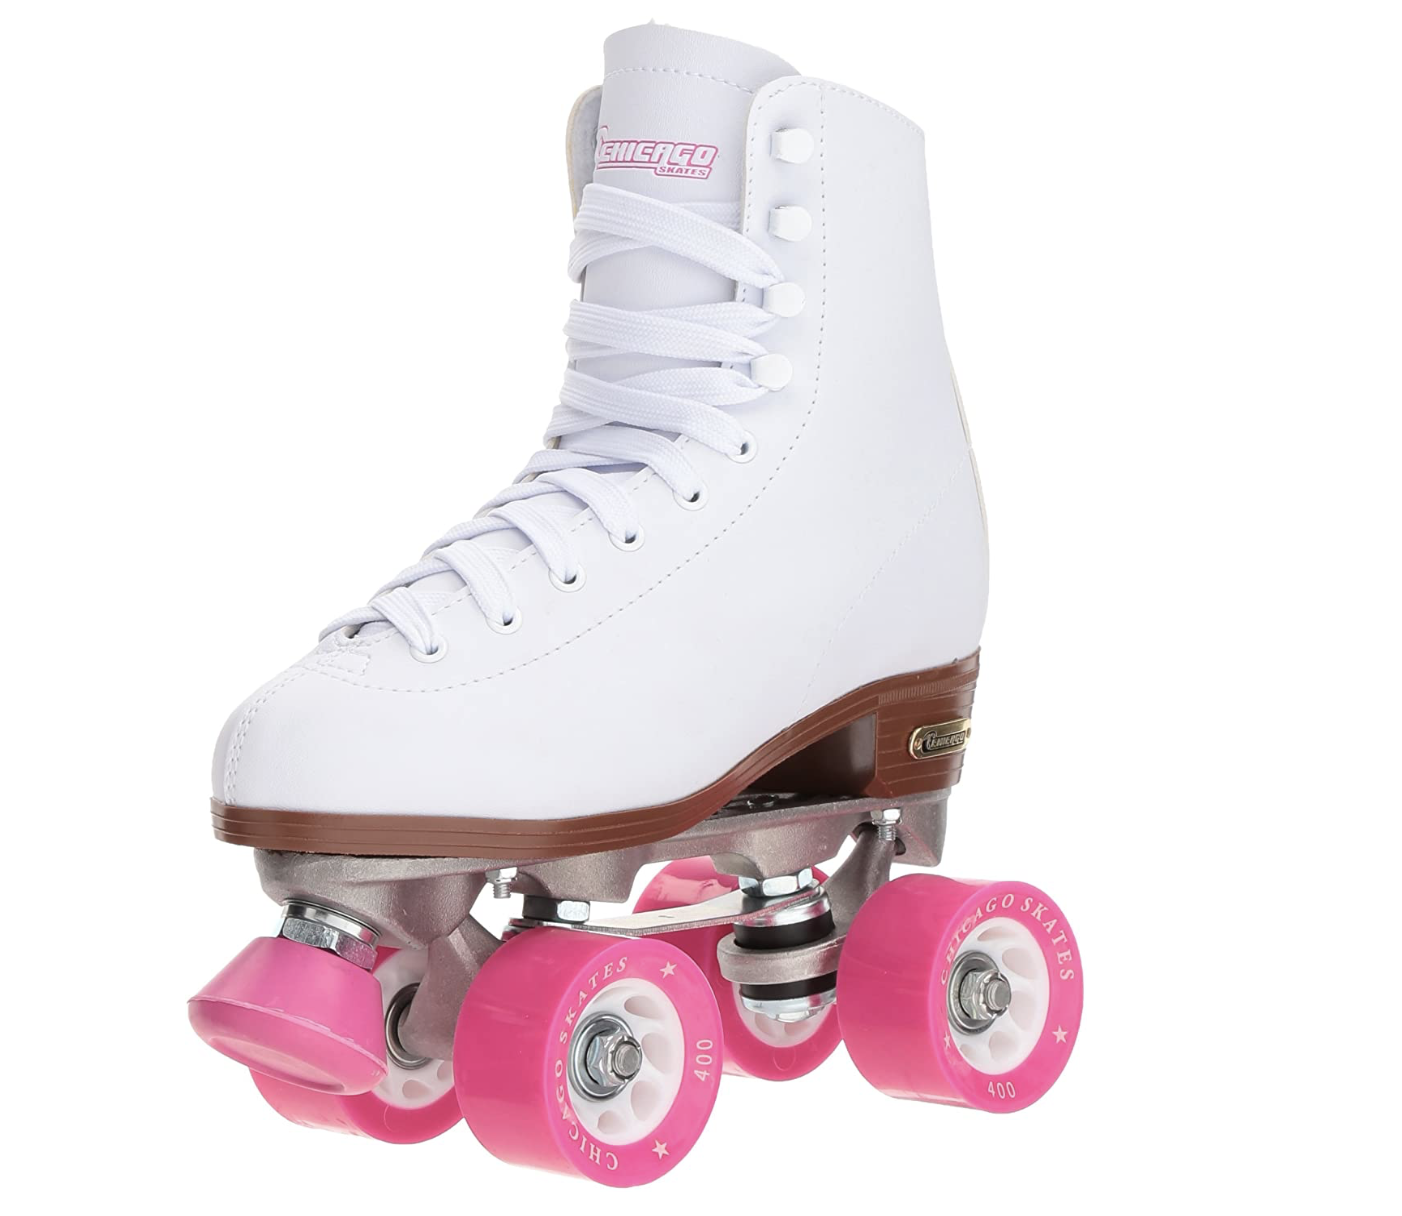 Comeon Women Roller Skates High-top Four-Wheel Roller Skates Double Row Outdoor Roller Skating for Youth and Adults 